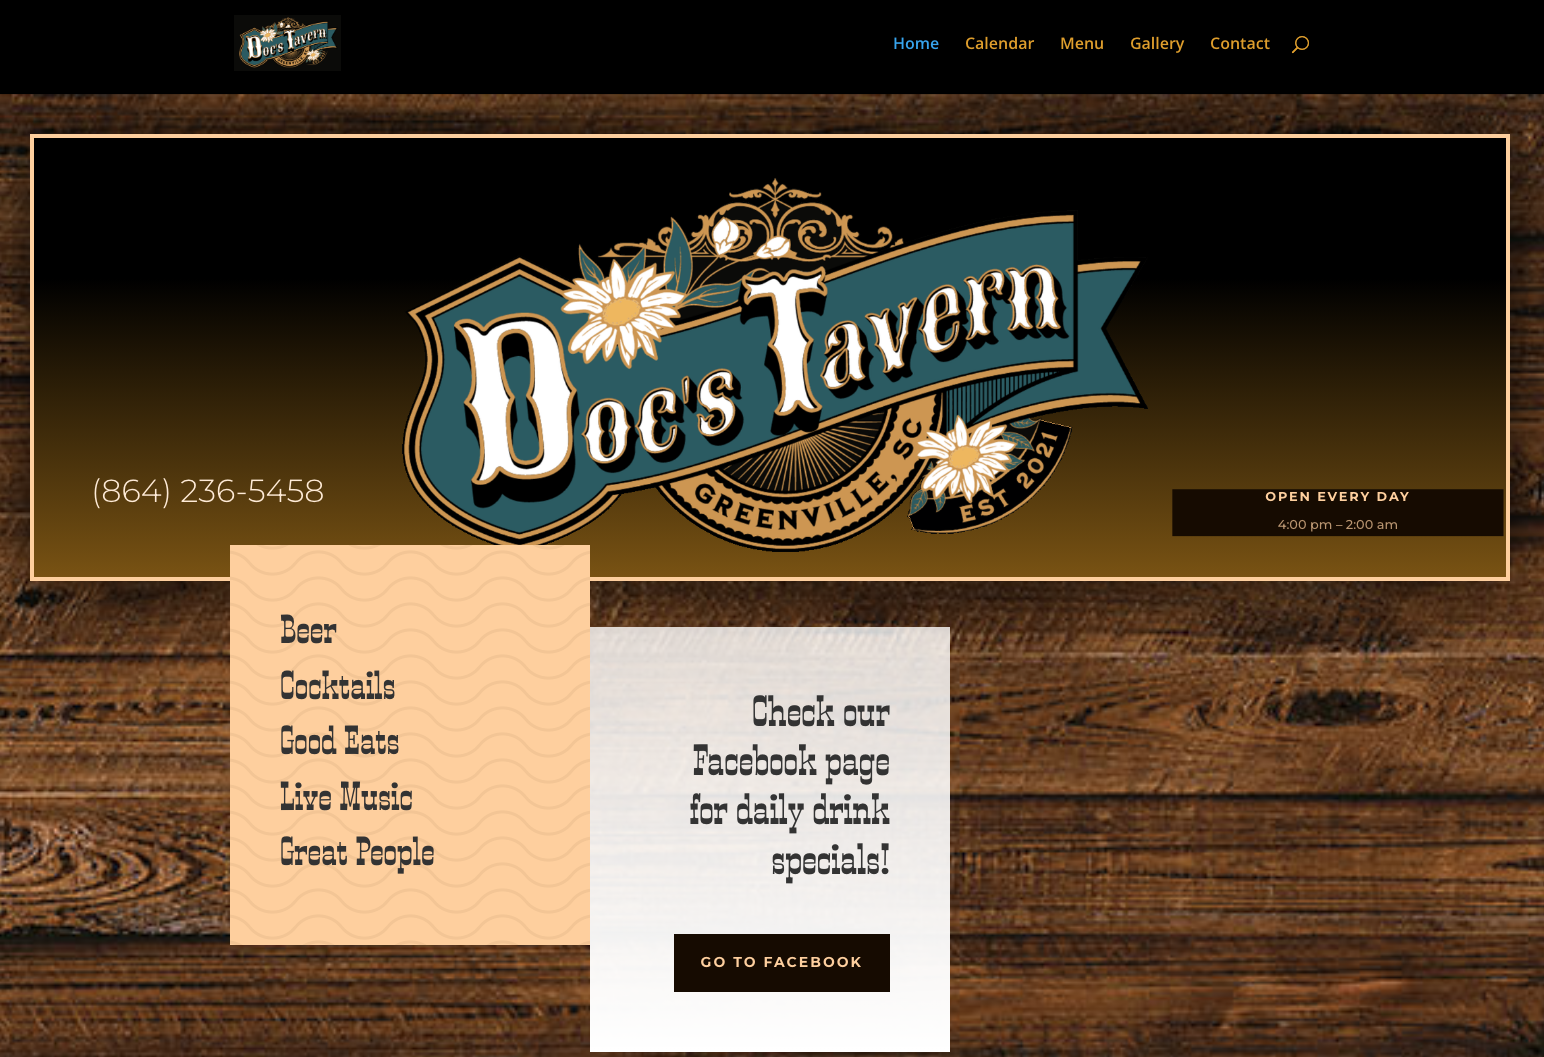 Doc's Tavern website home page